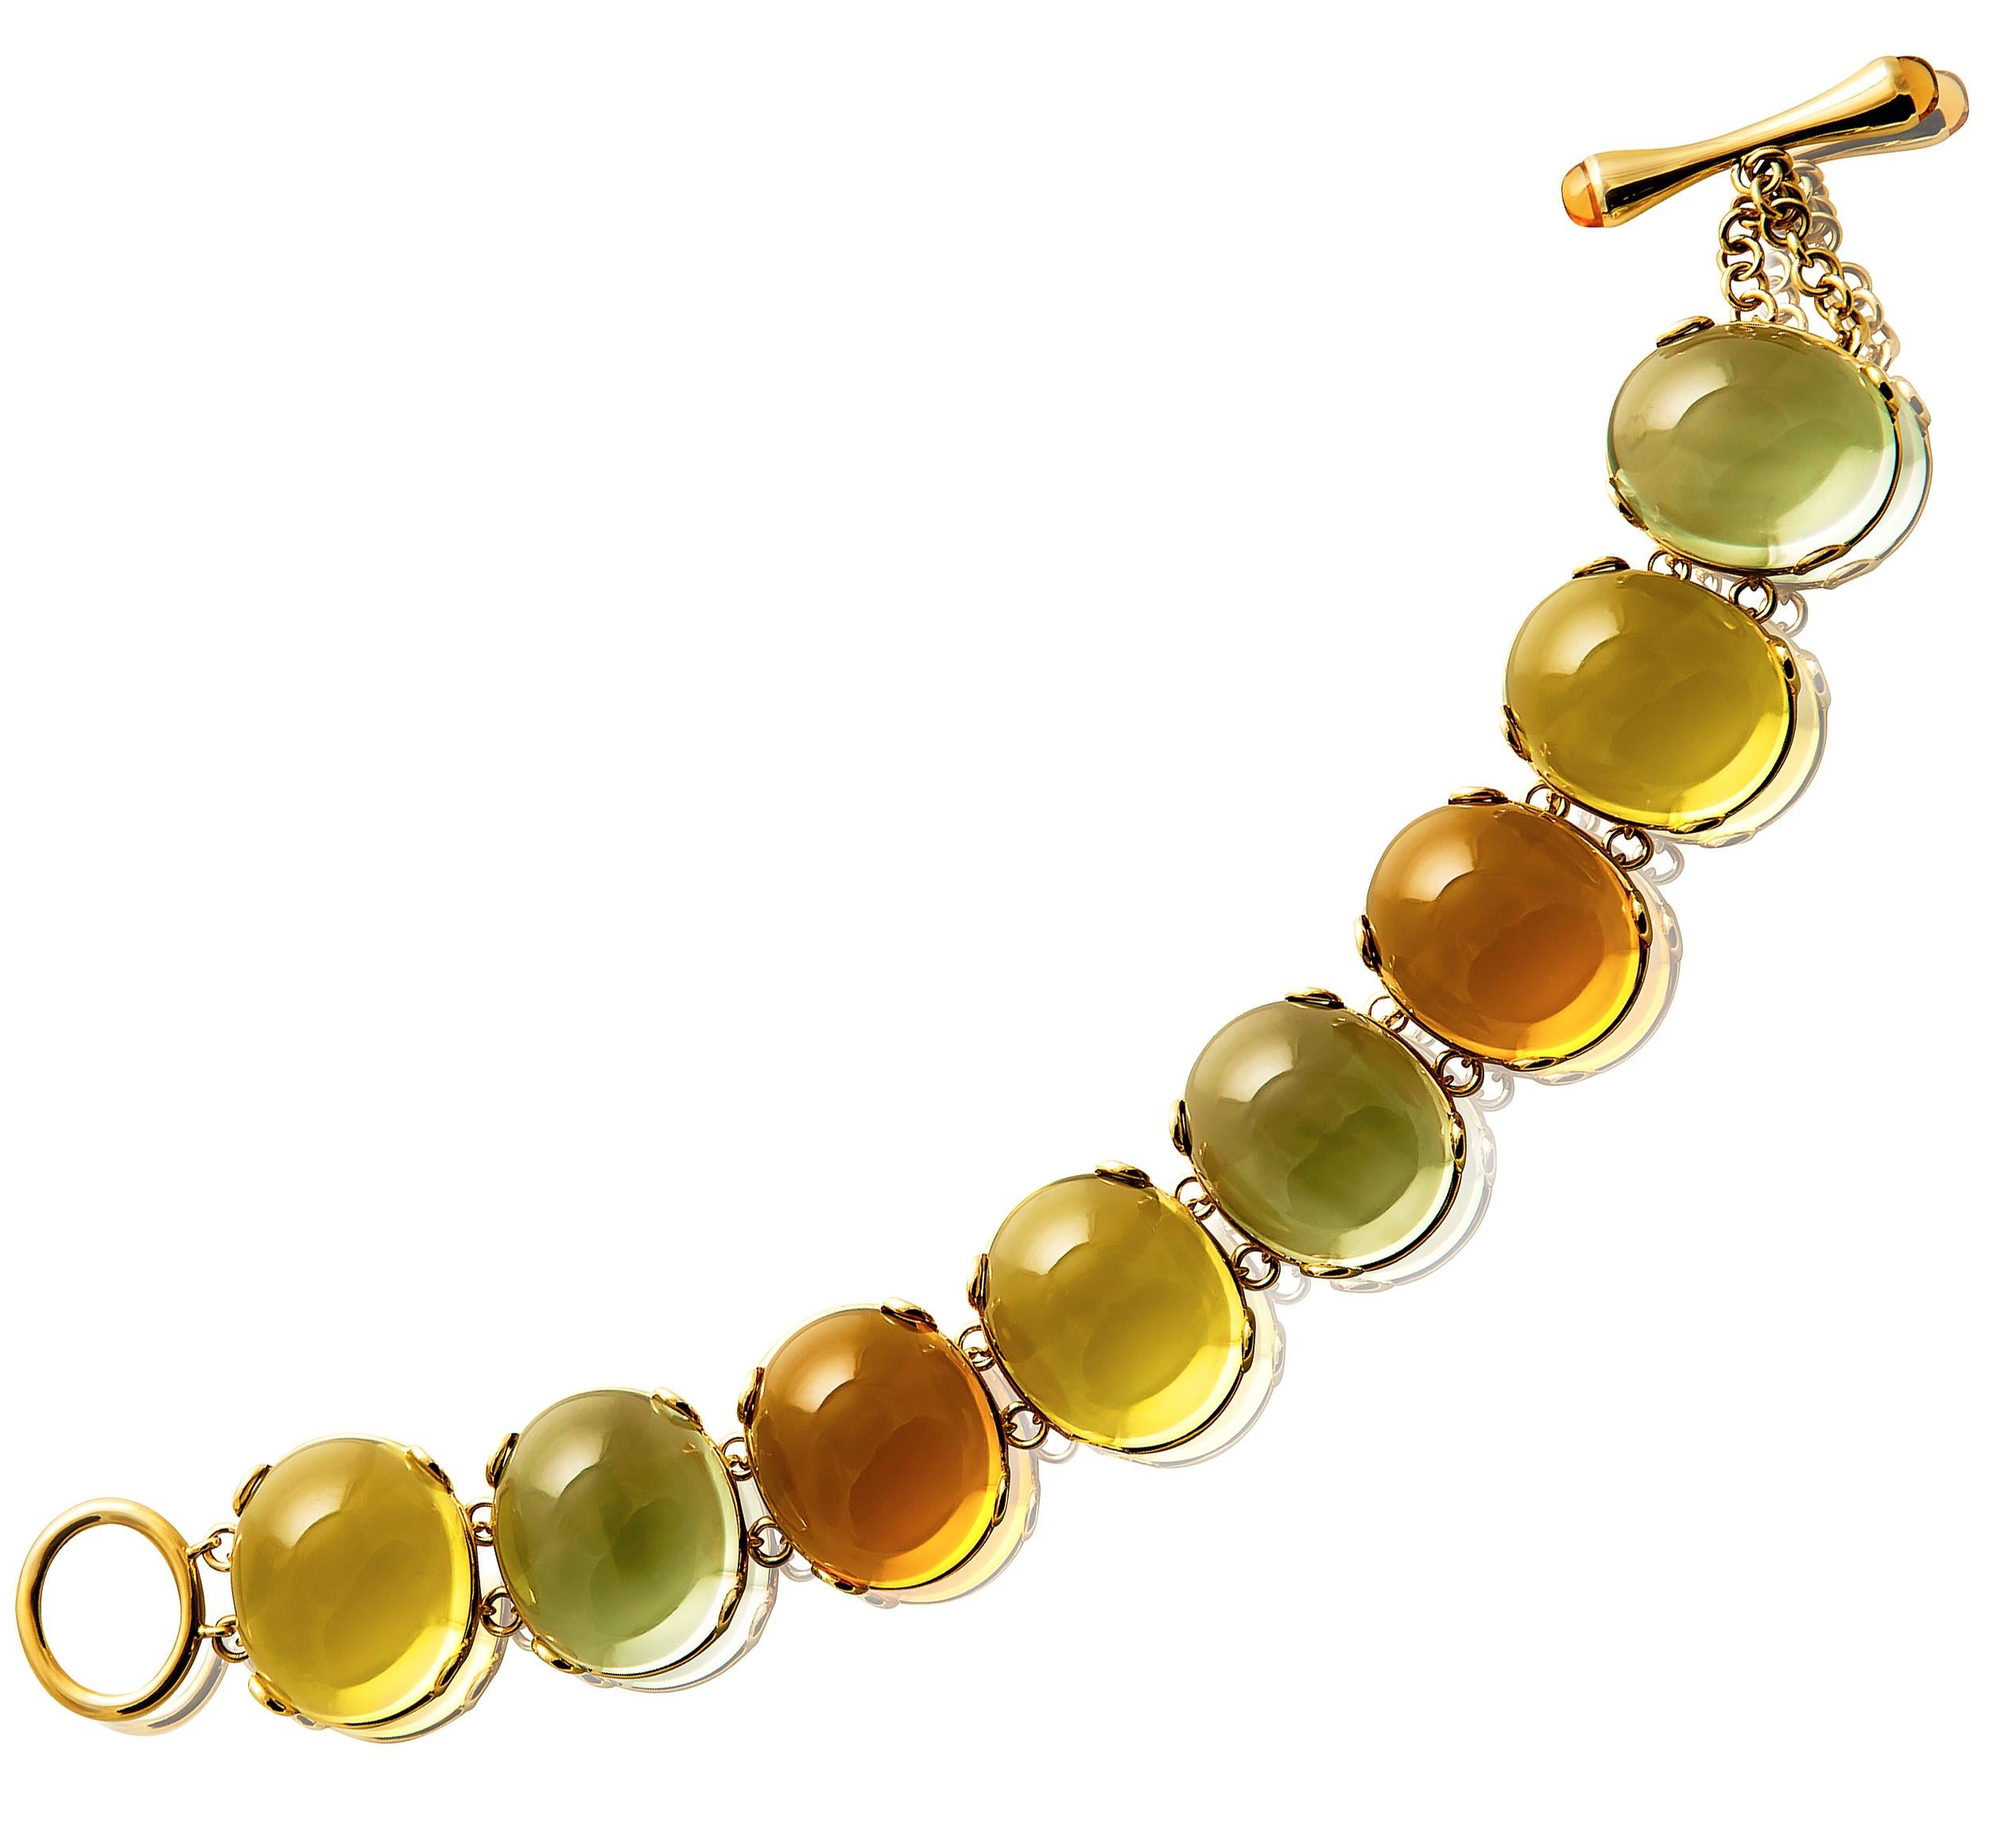 Multi-Color Oval Cabochon Bracelet in 18K Yellow Gold, from 'Rock 'N Roll' Collection
 
 Length: 6 3/4''
 
 Stone Size: 20 x 17 mm 
 
 Gemstone Approx. Wt: 173 Carats